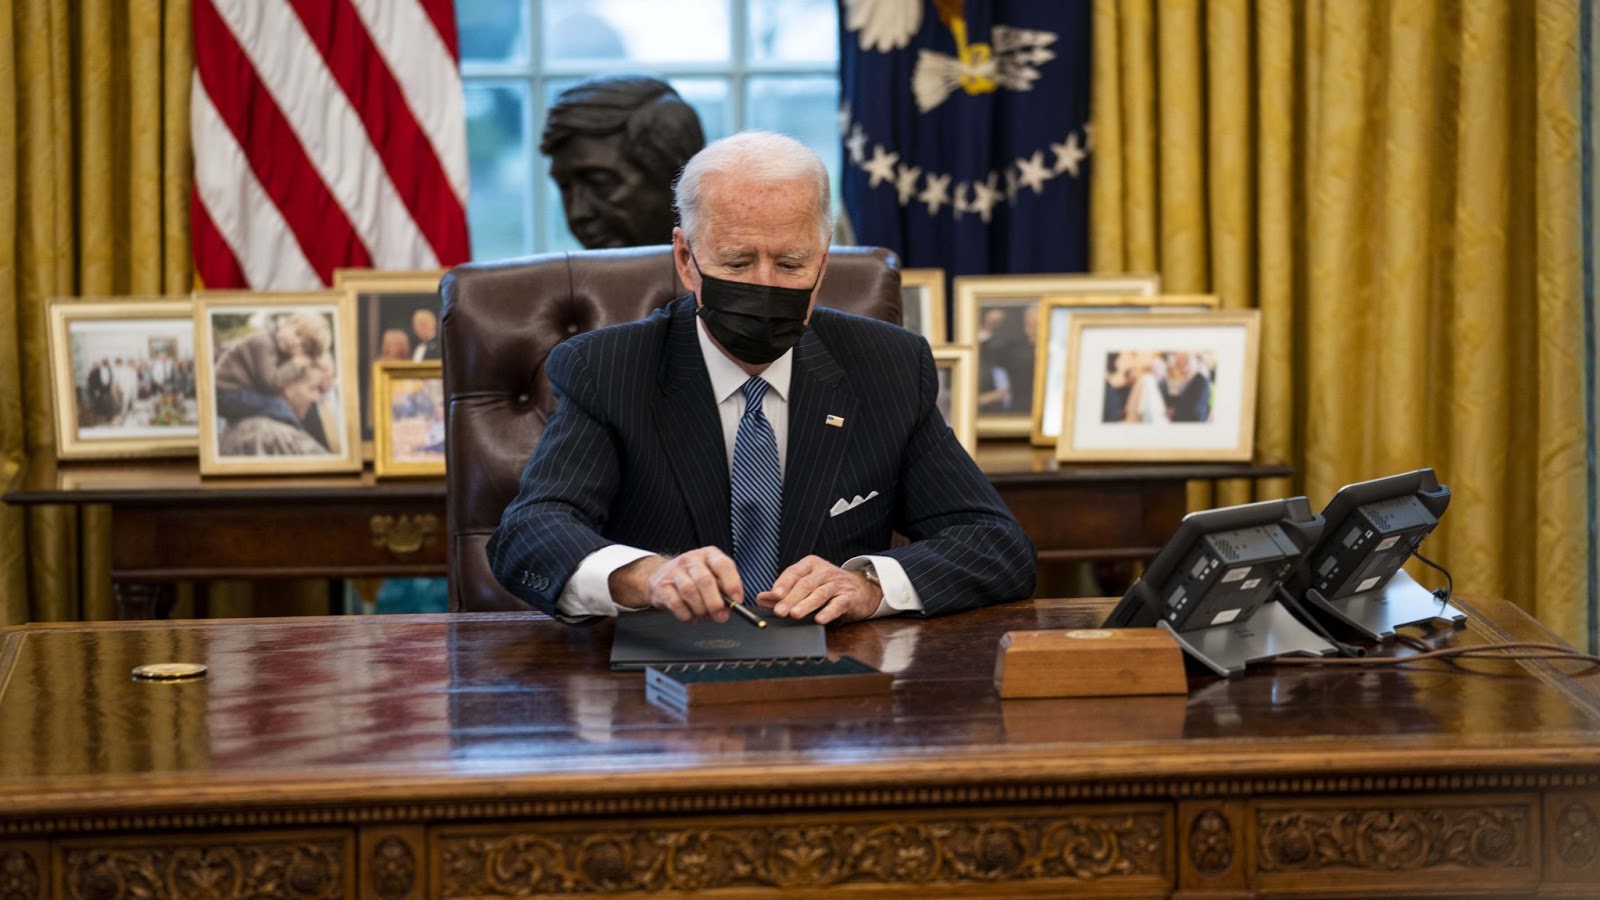 Biden’s likely policy orientation towards Africa